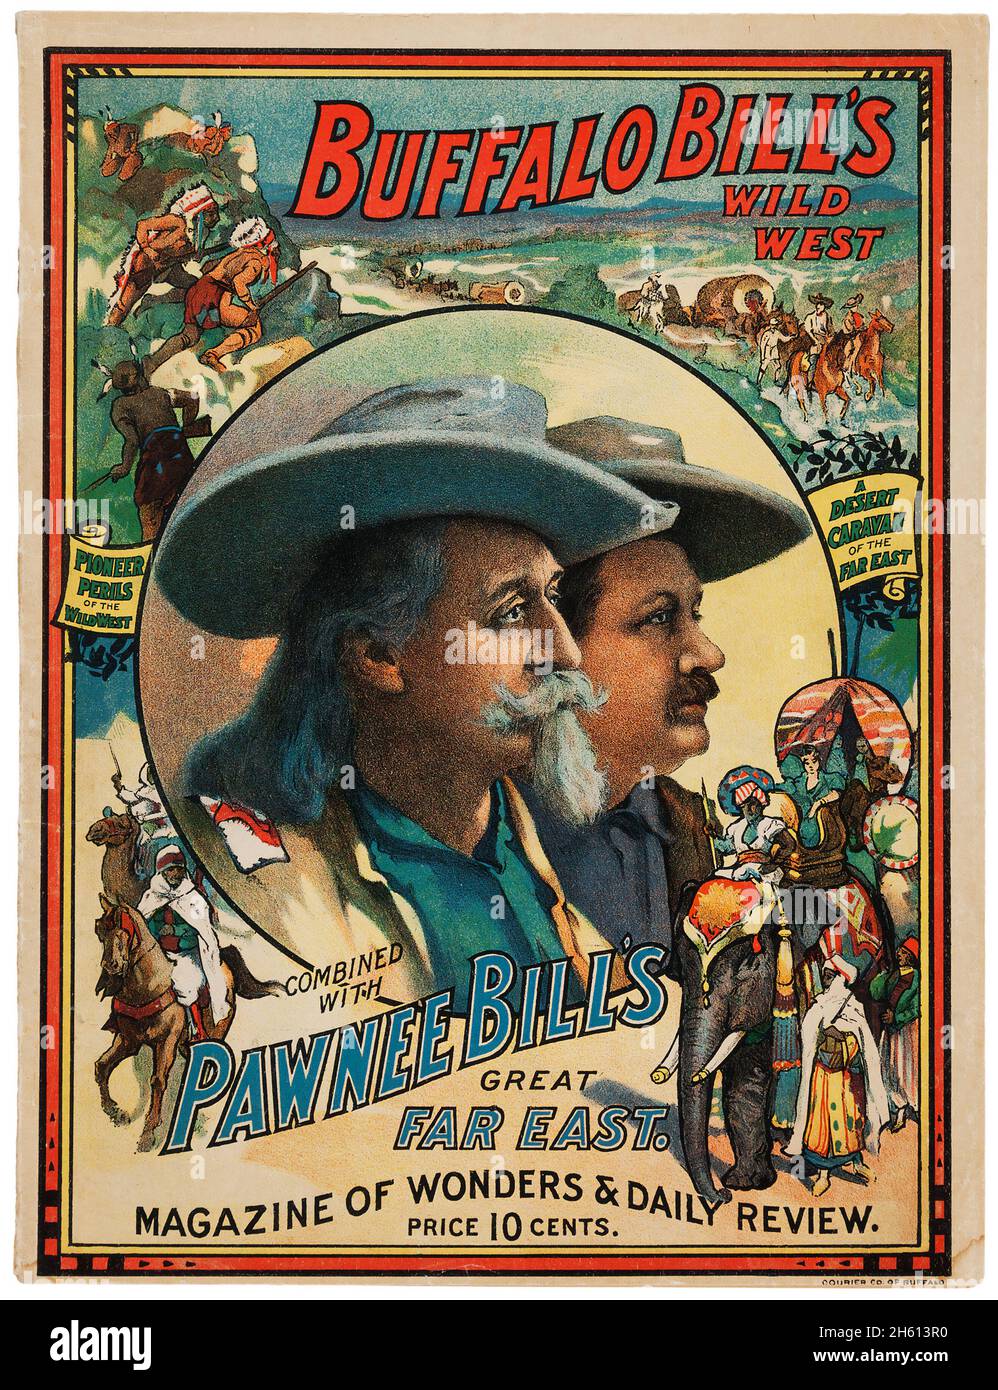 William F. 'Buffalo Bill' Cody and Gordon 'Pawnee Bill' - 1909 Official Program. 'Great Far East'. Magazine of Wonders & Daily Review'. Stock Photo